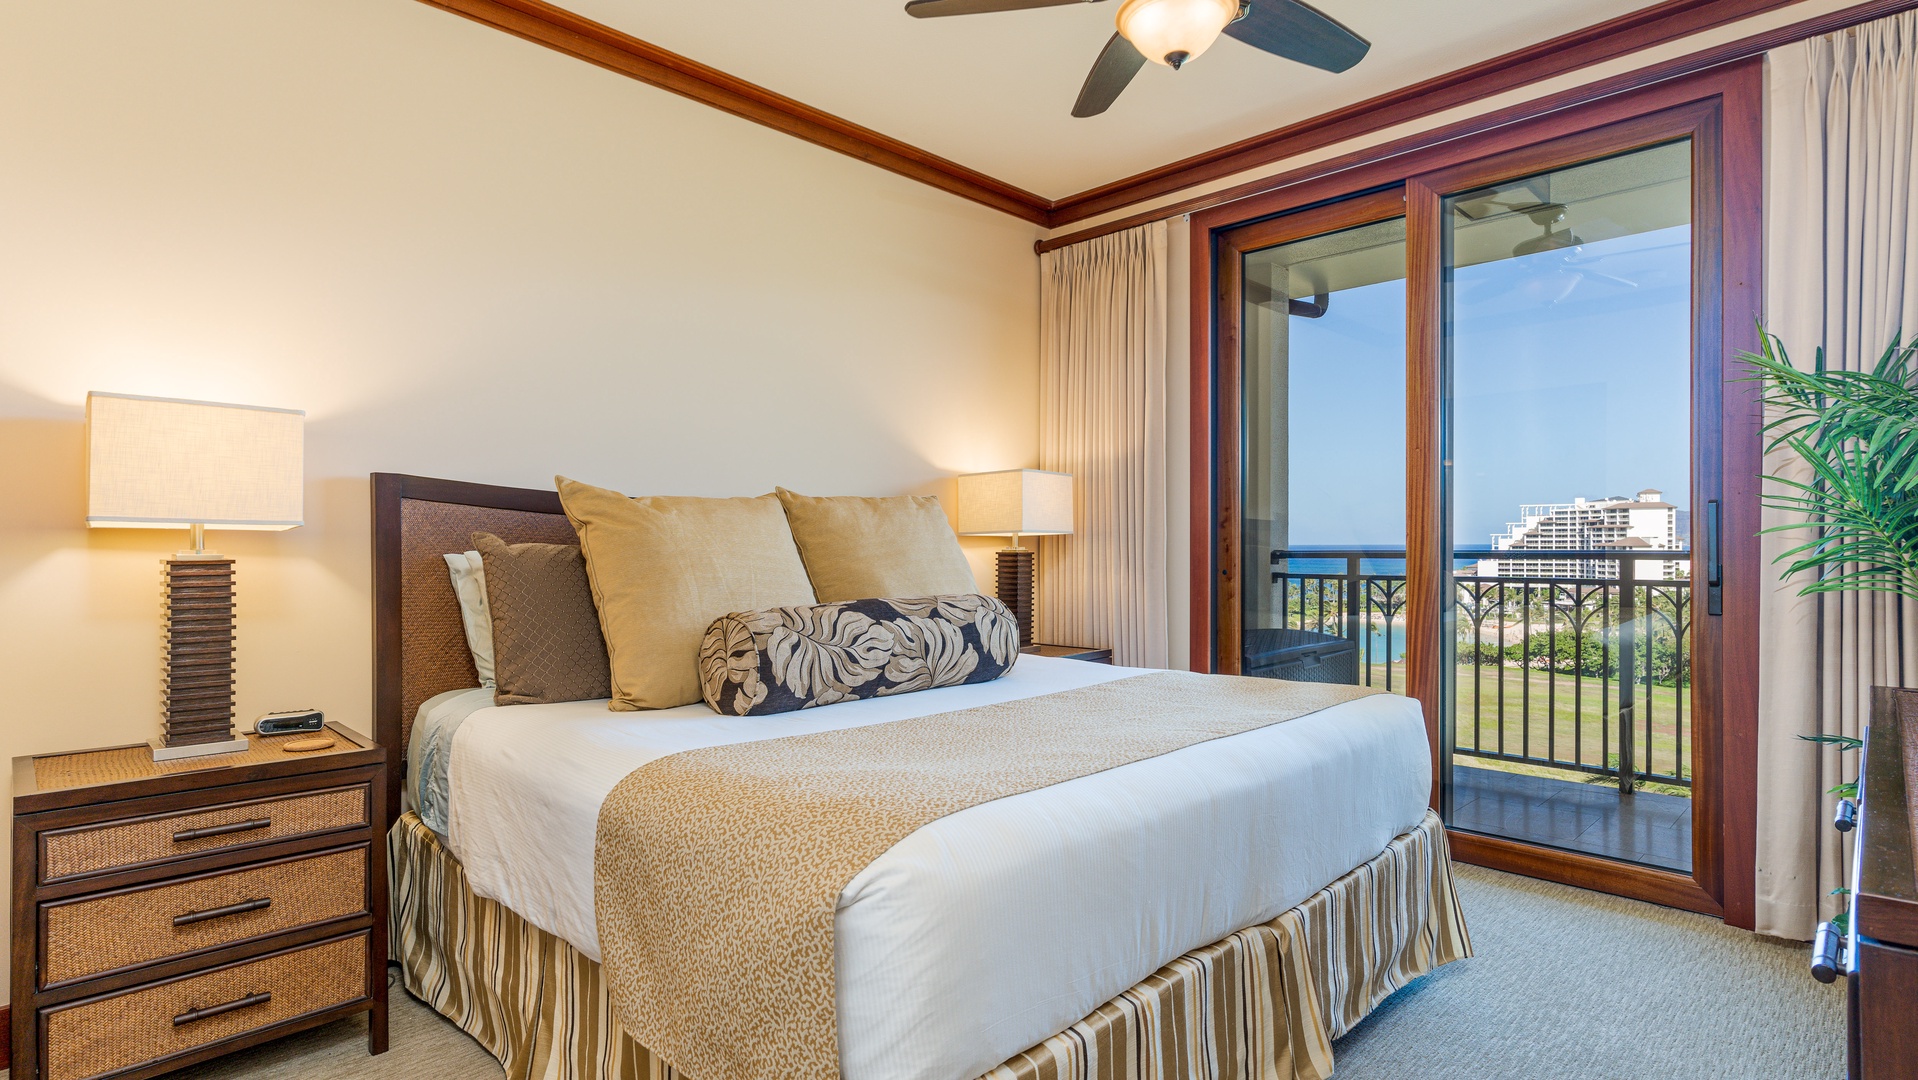 Kapolei Vacation Rentals, Ko Olina Beach Villas B1101 - The primary guest bedroom with a king bed and incredible views.